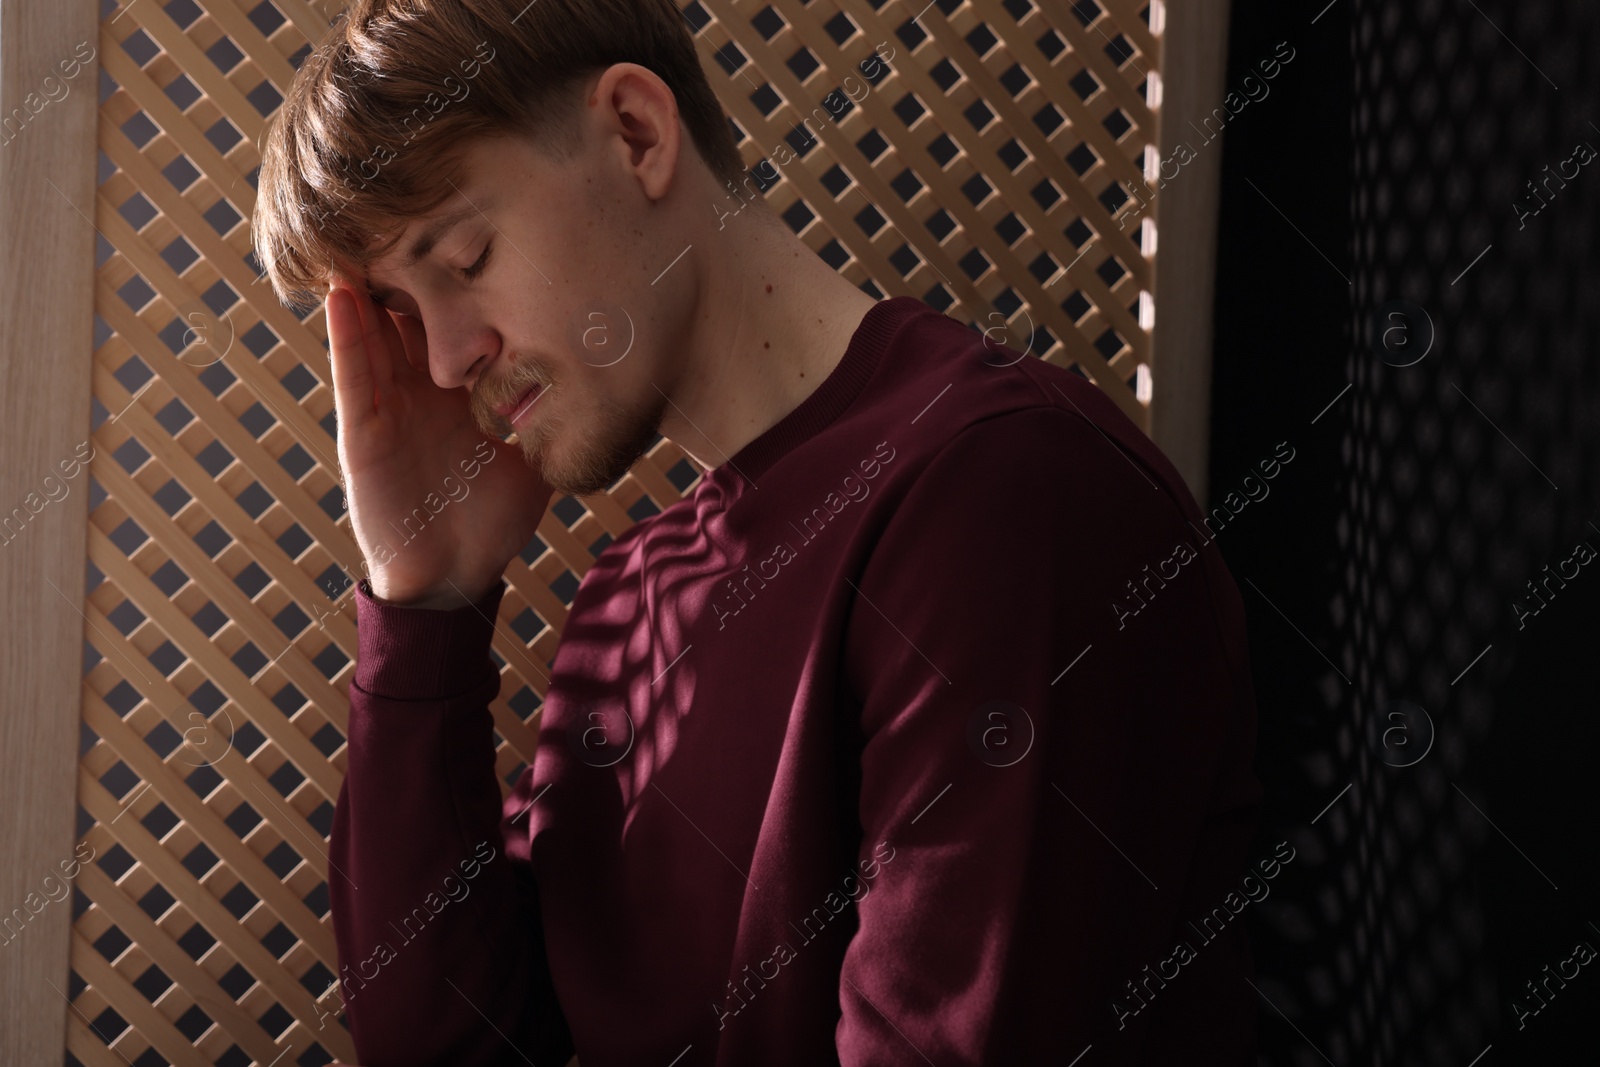 Photo of Upset young man during confession in church